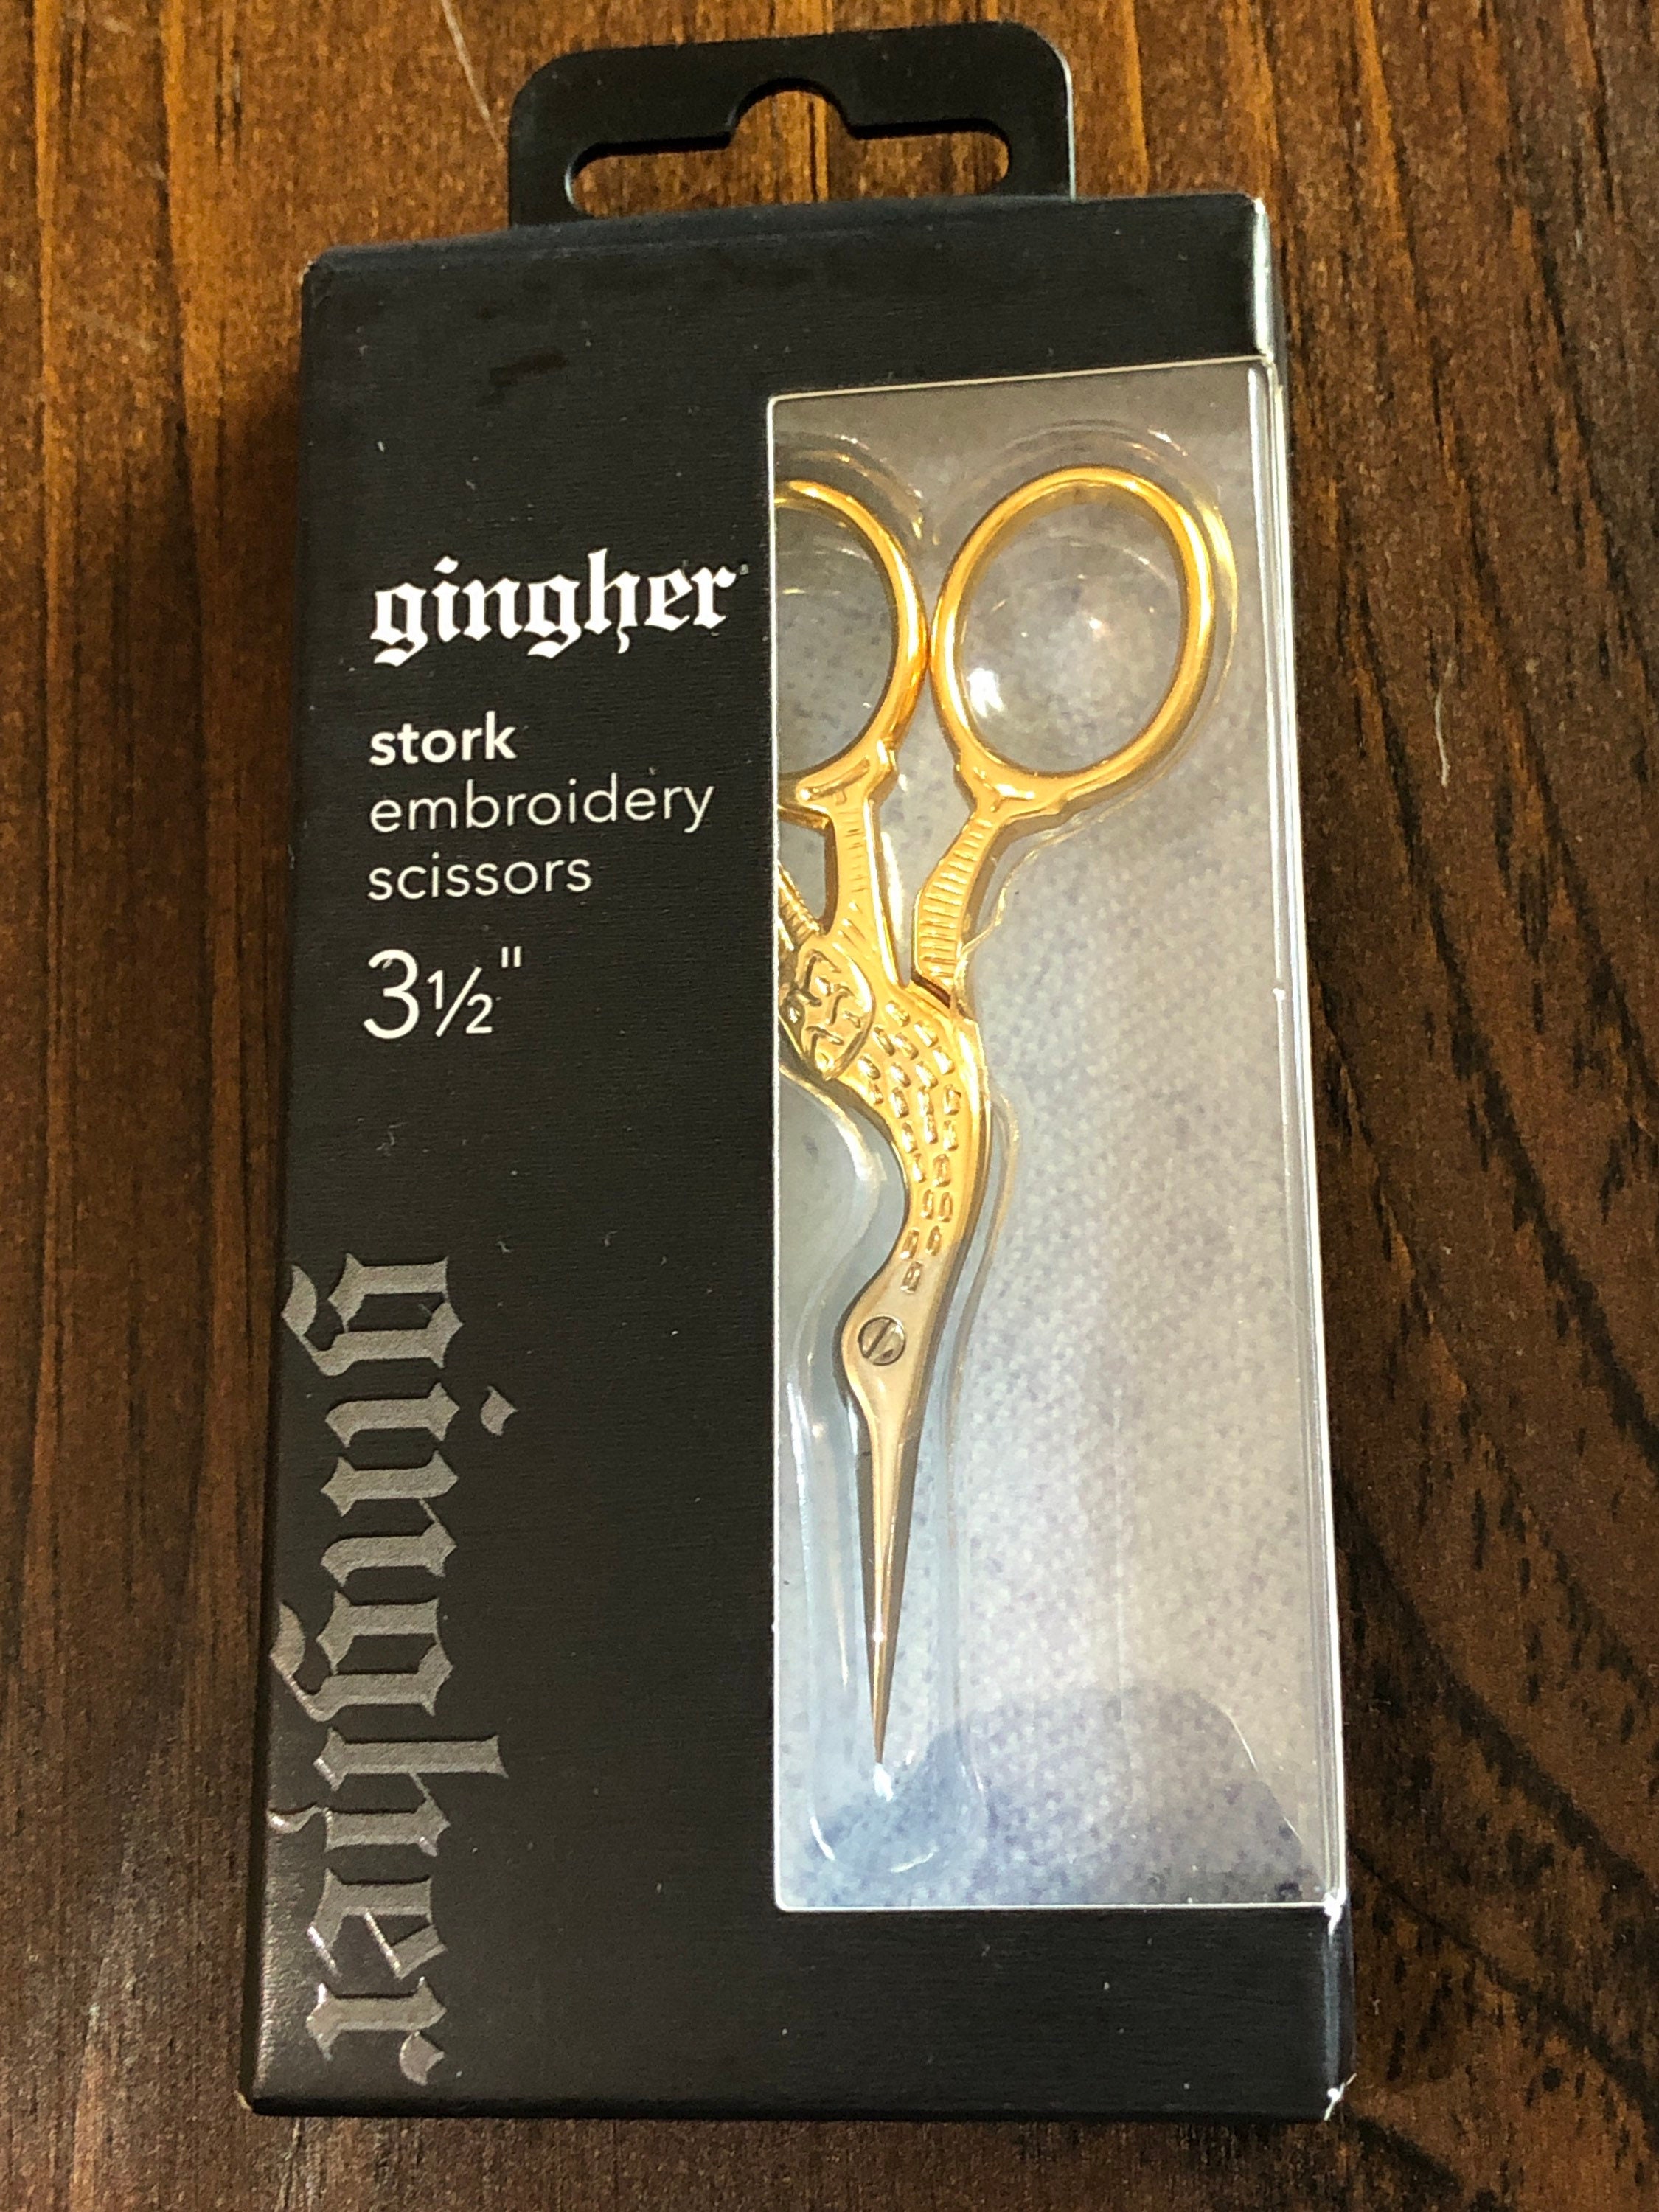 Gingher G-CST 3-1/2 inch Stork Embroidery Scissors (Chrome Handle)